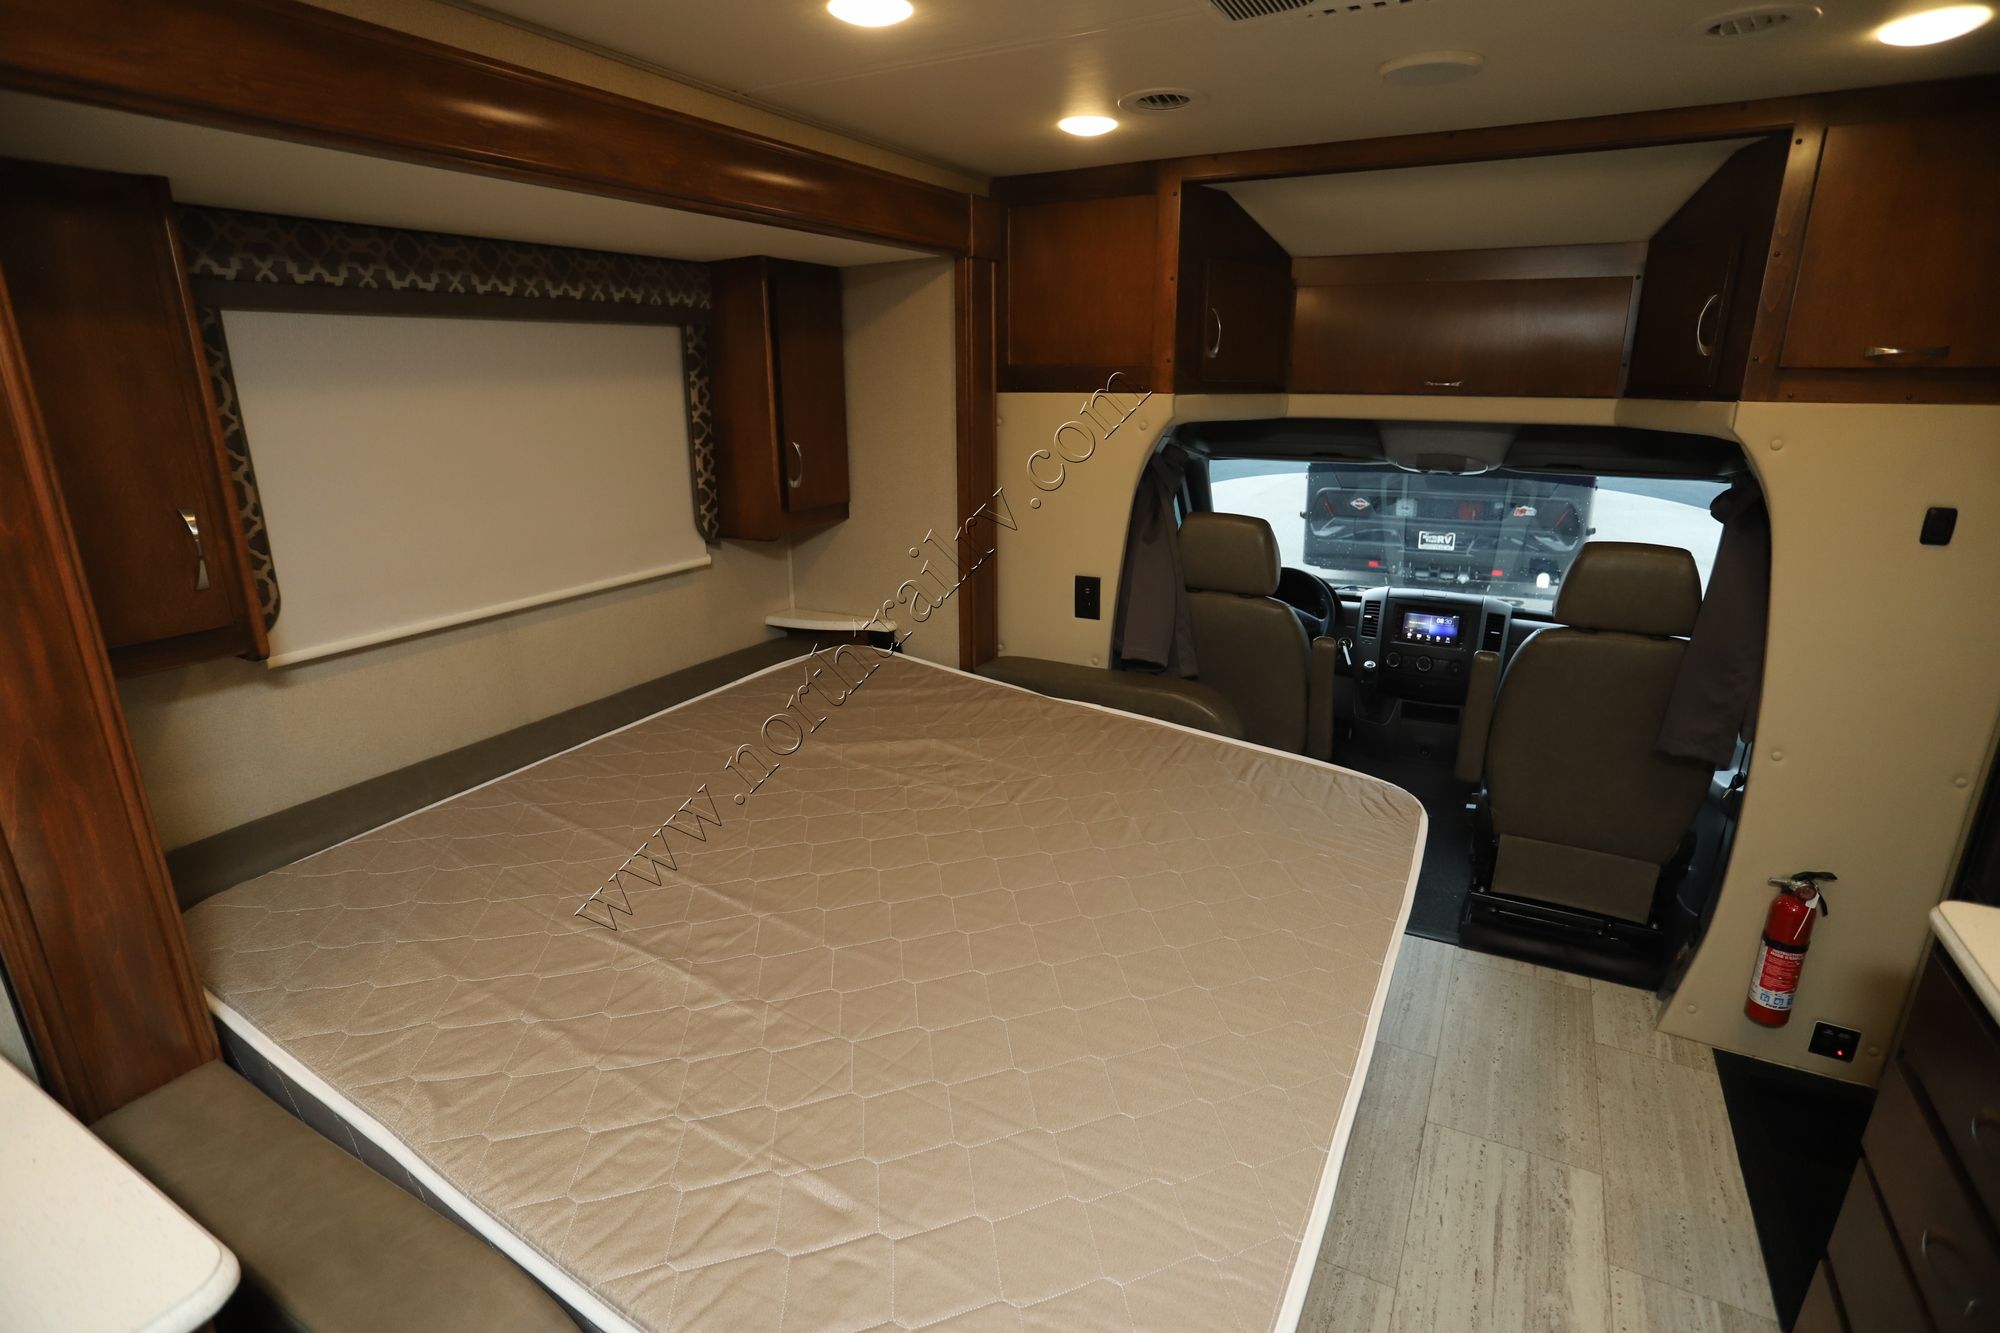 Used 2019 Renegade Rv Villagio 25MBS Class C  For Sale